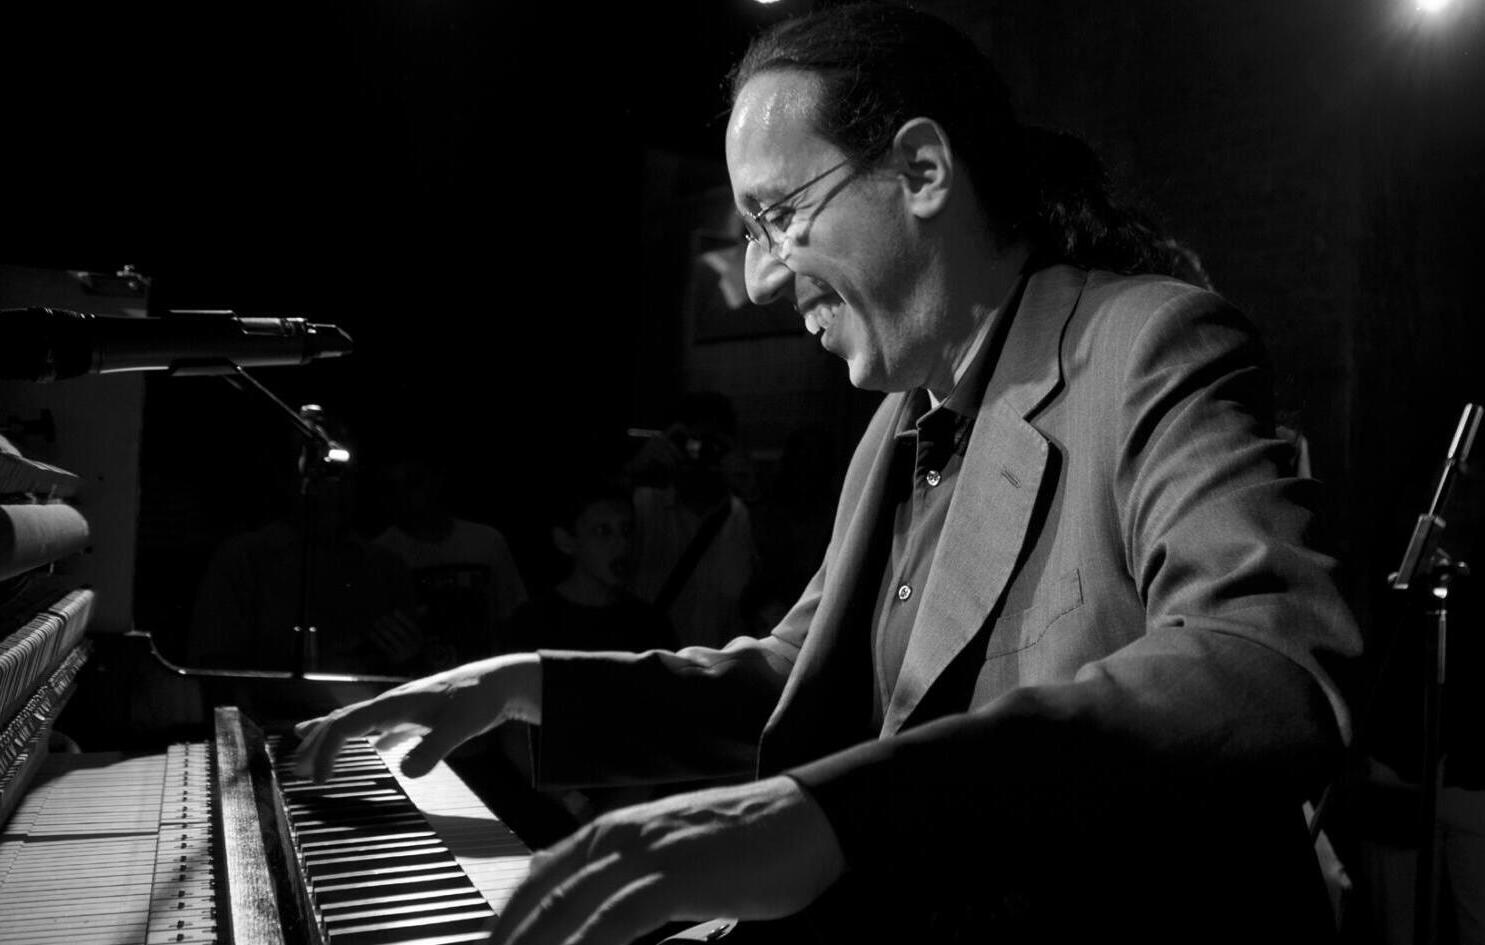 A man plays the piano laughing.